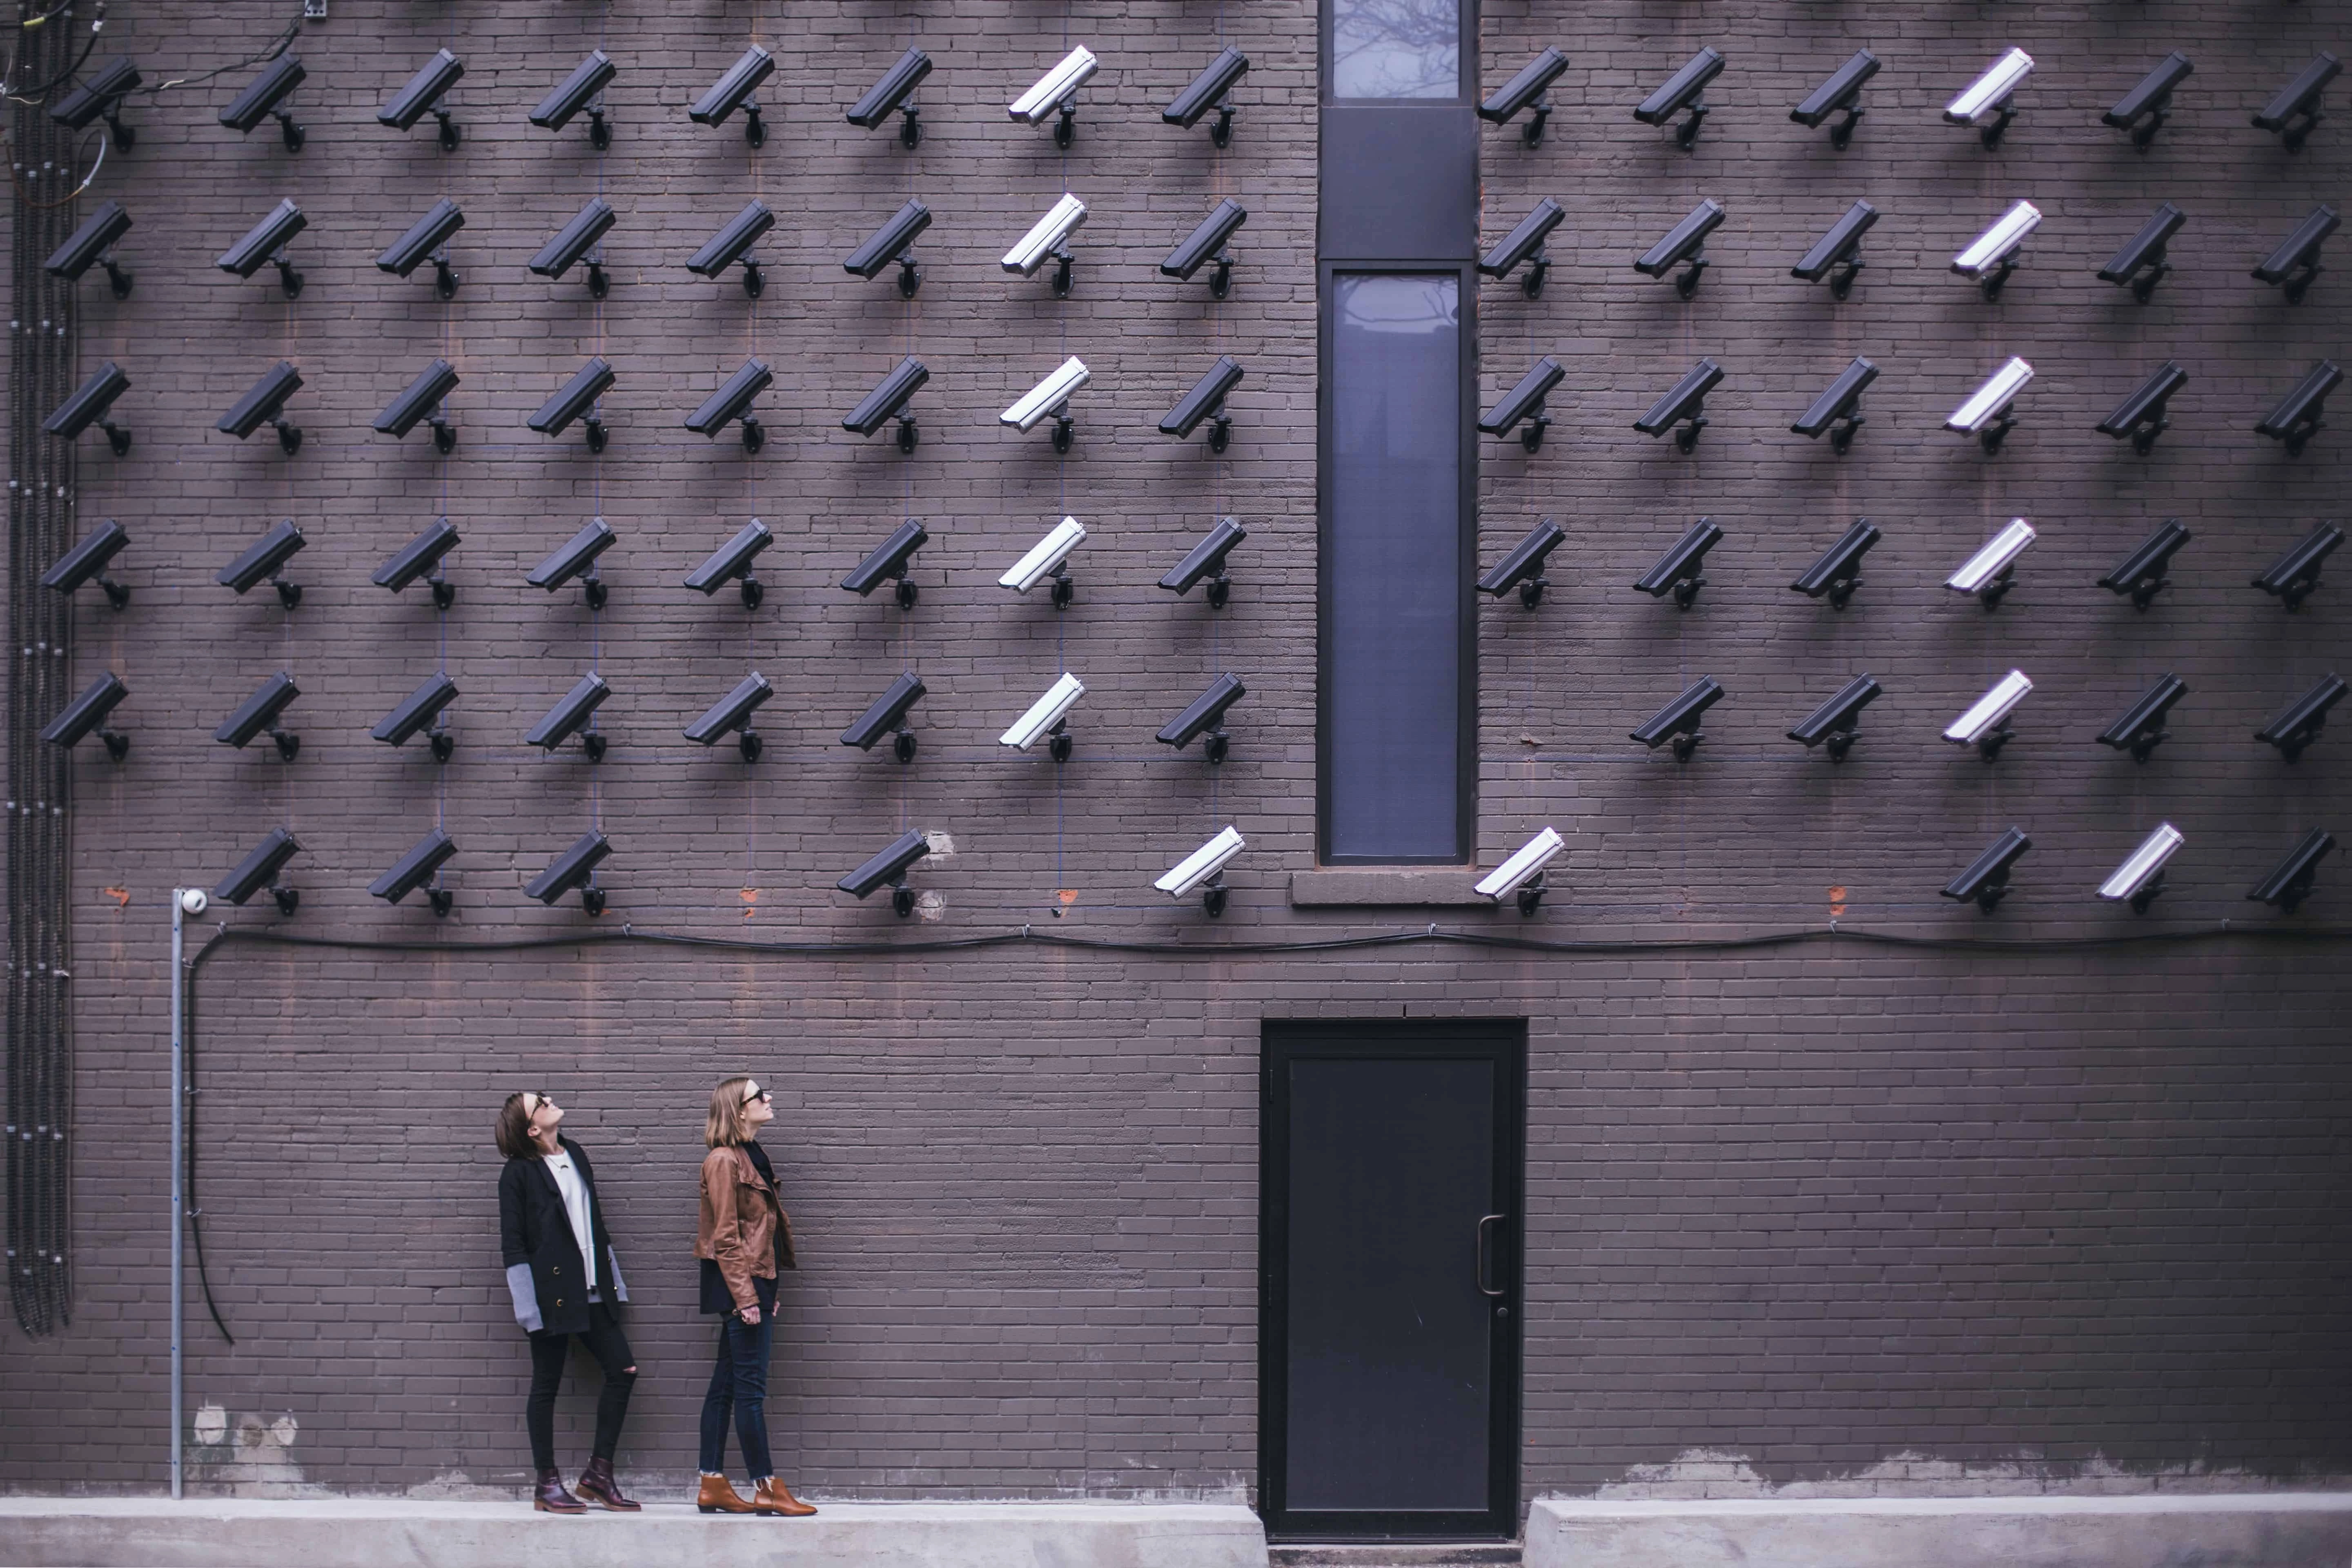 Two women with hundreds of security cameras pointed down at them